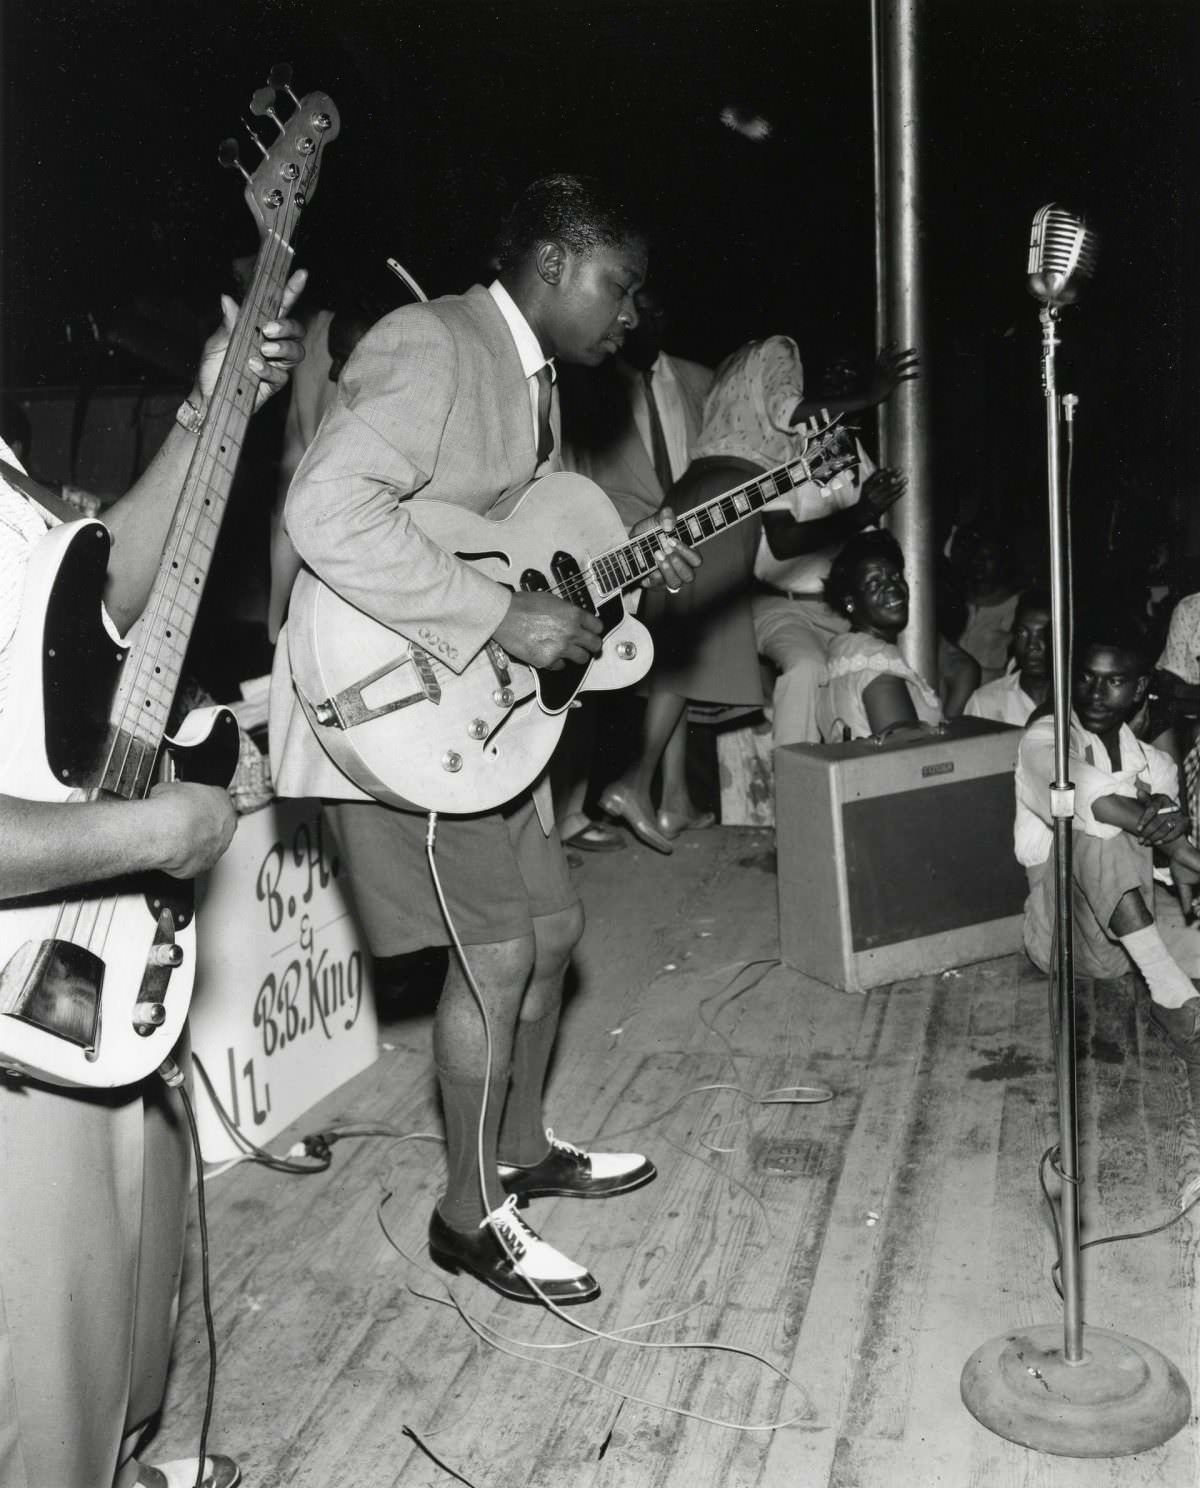 BB King on stage at the Hippodrome, Beale Street in Memphis, TN, with Bill Harvey.